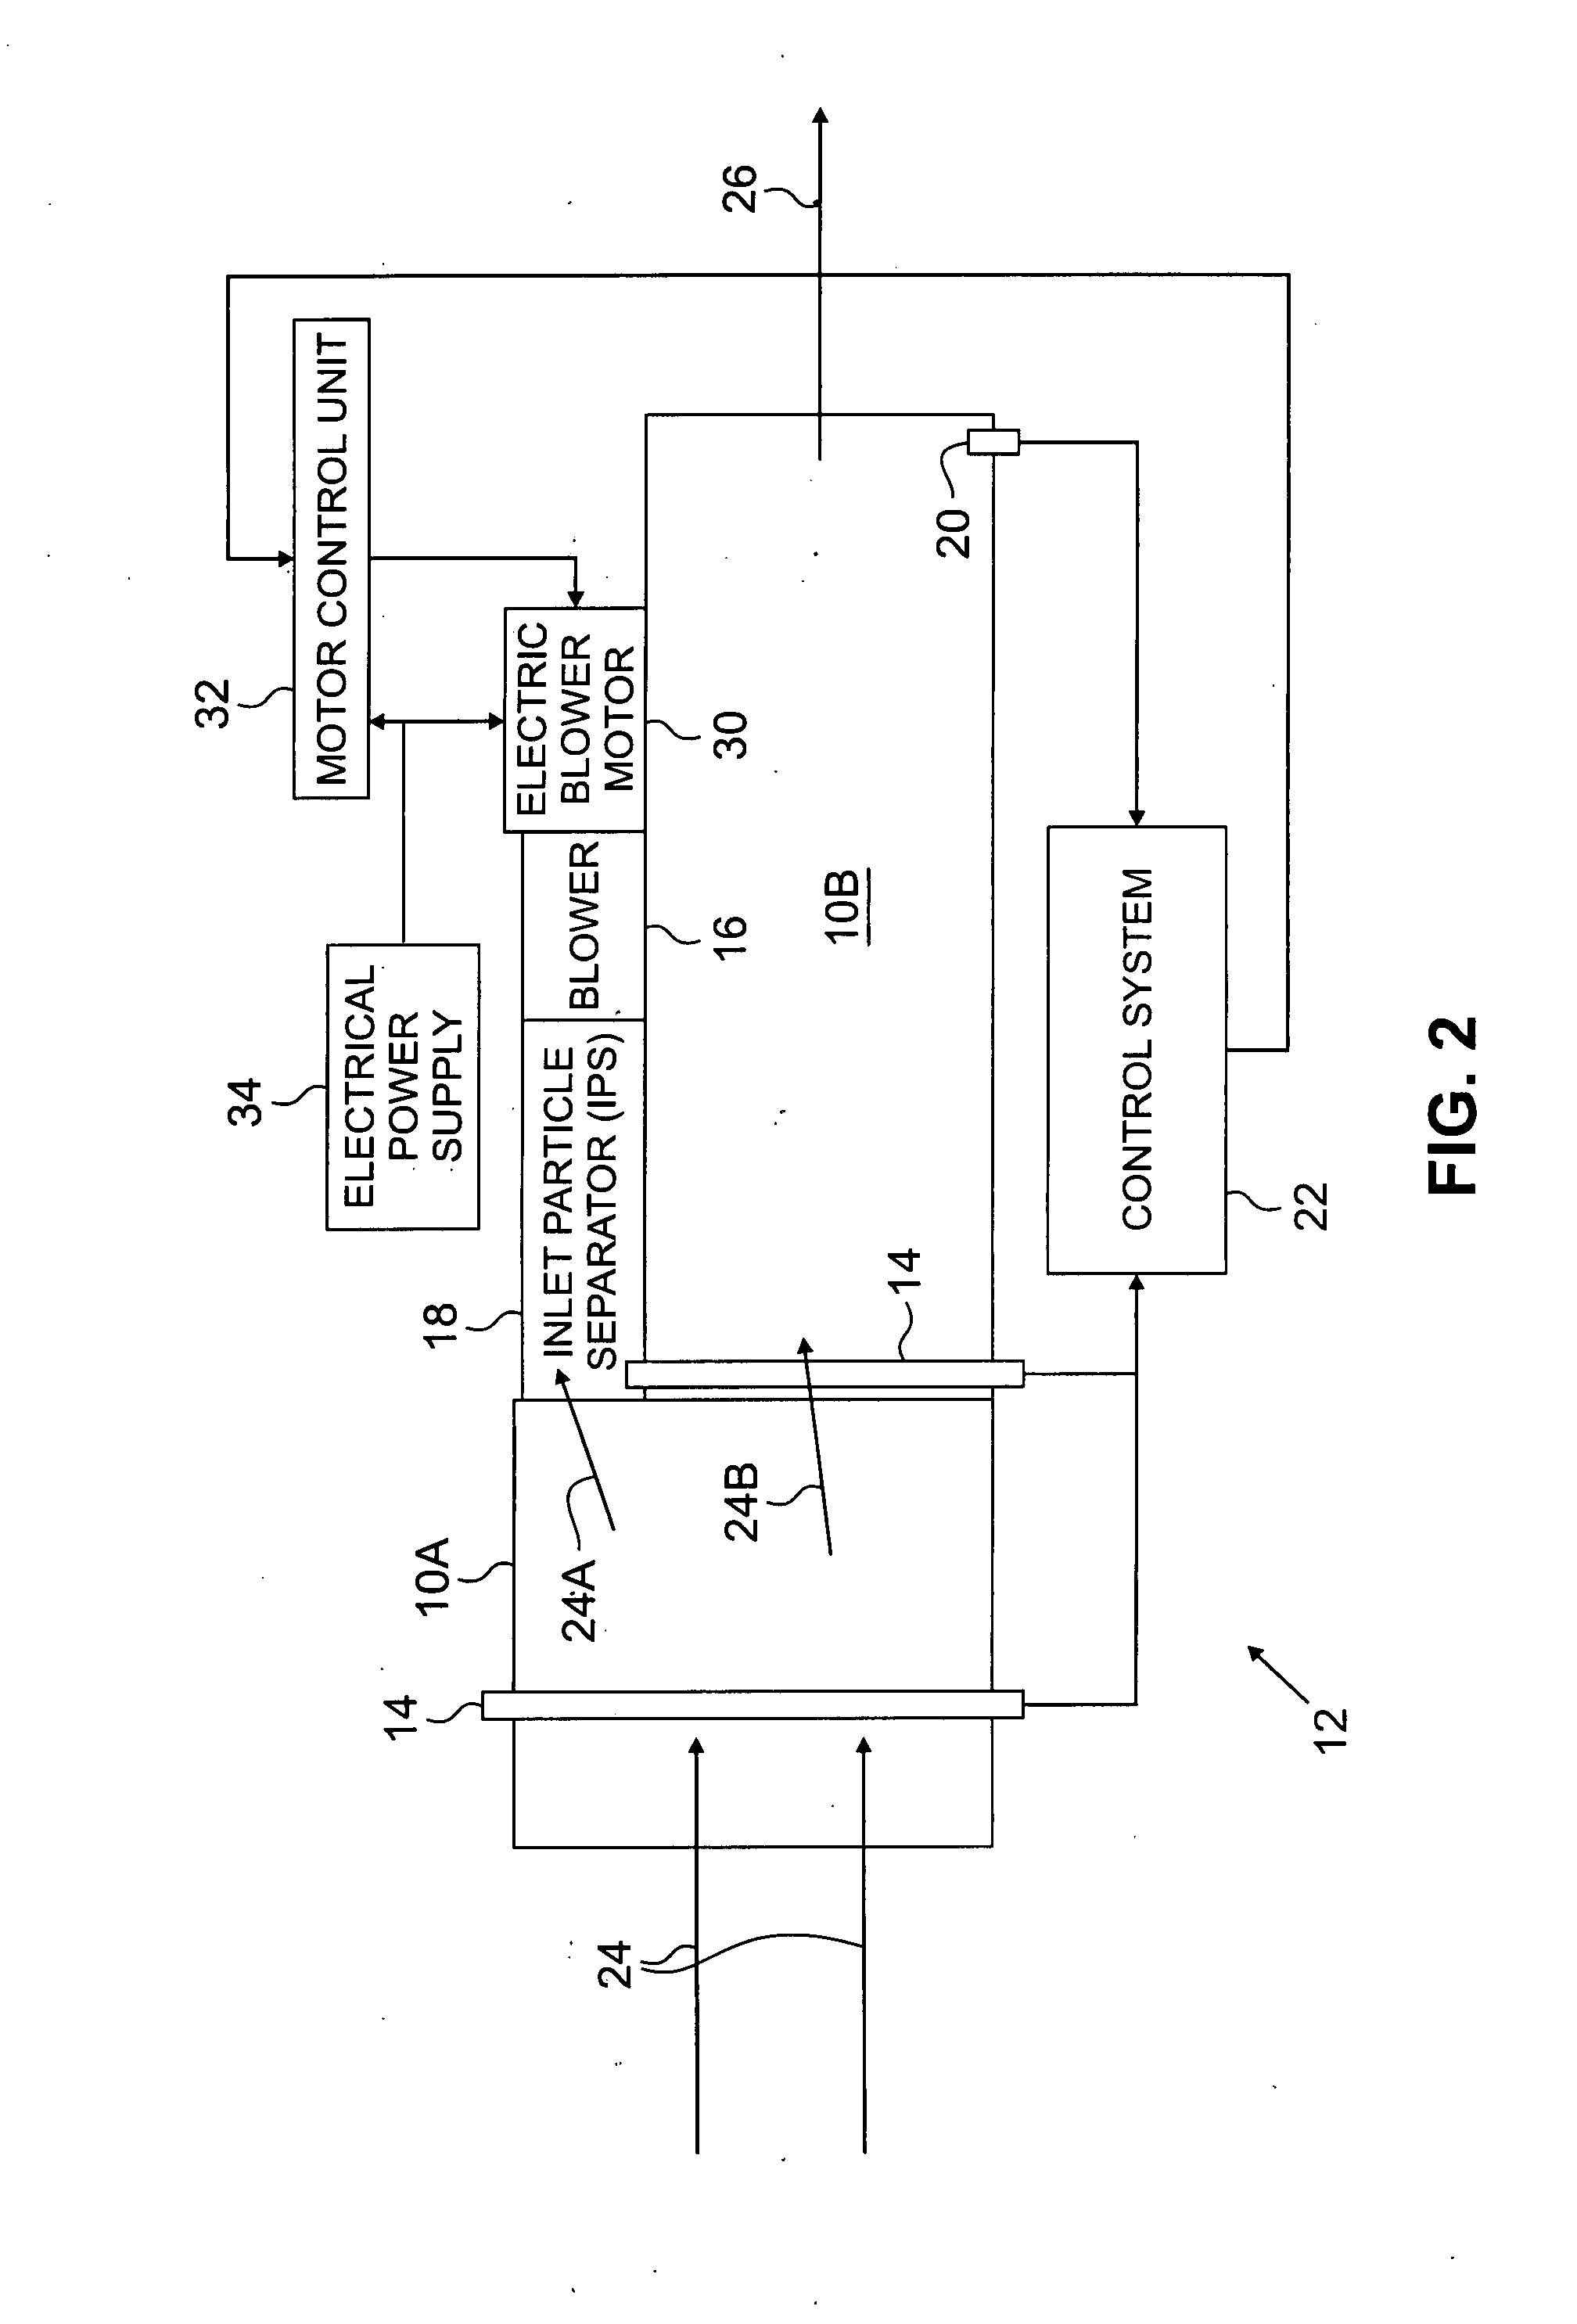 Particle separator and debris control system